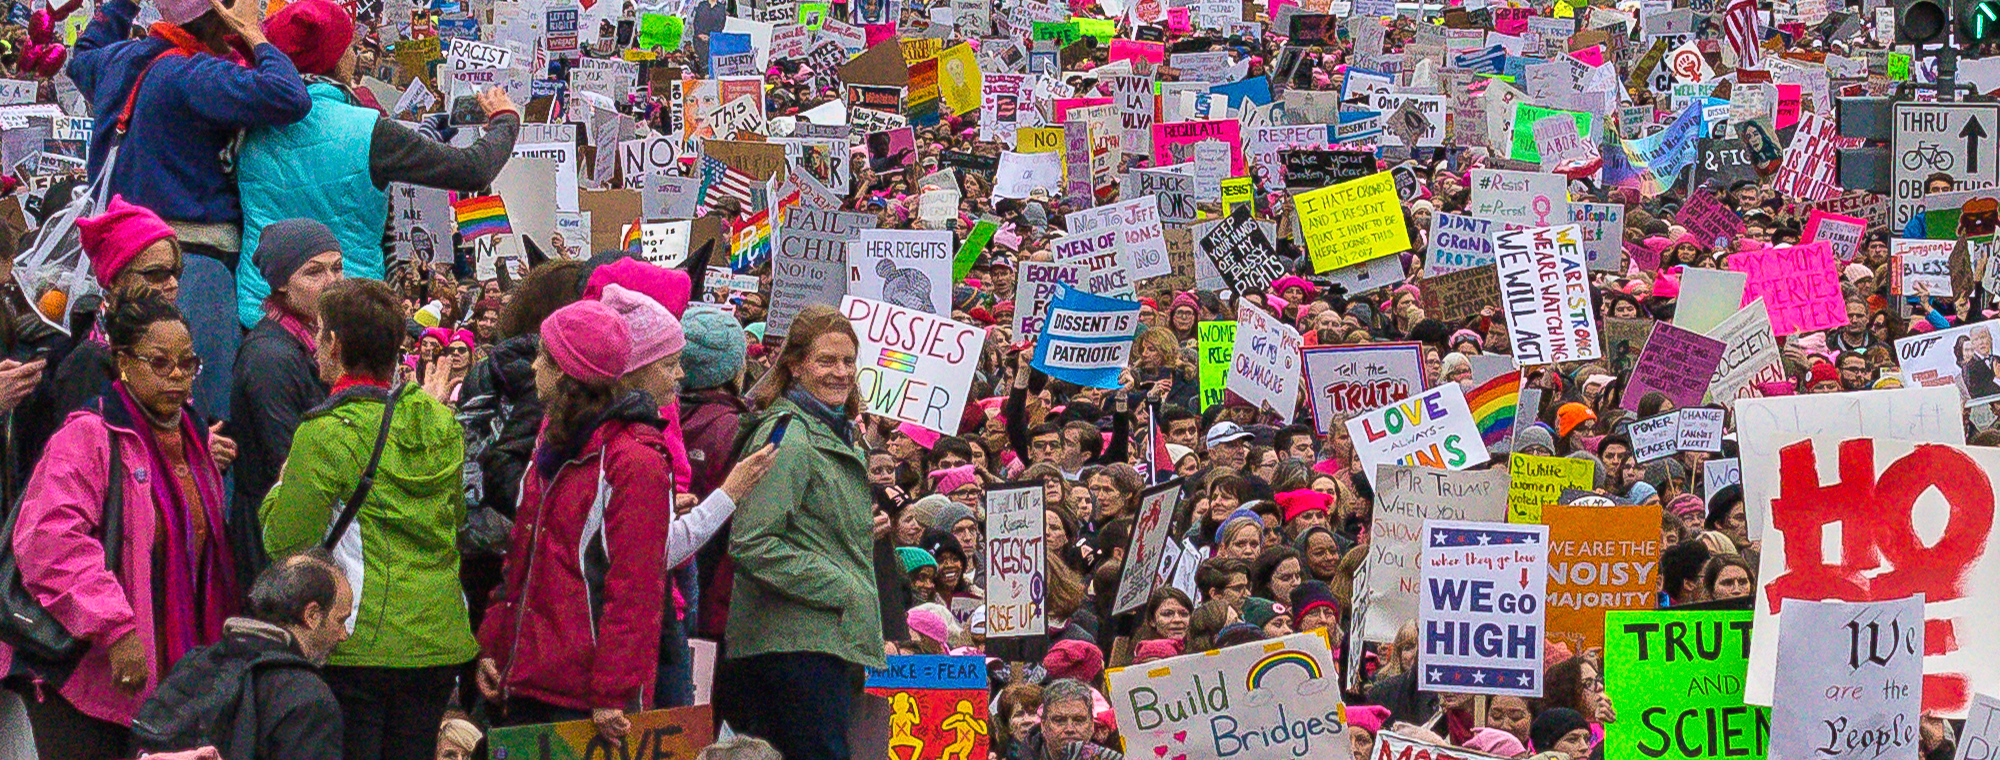 Flickr Women's March on Washington by Mobilius in Mobili (cc)